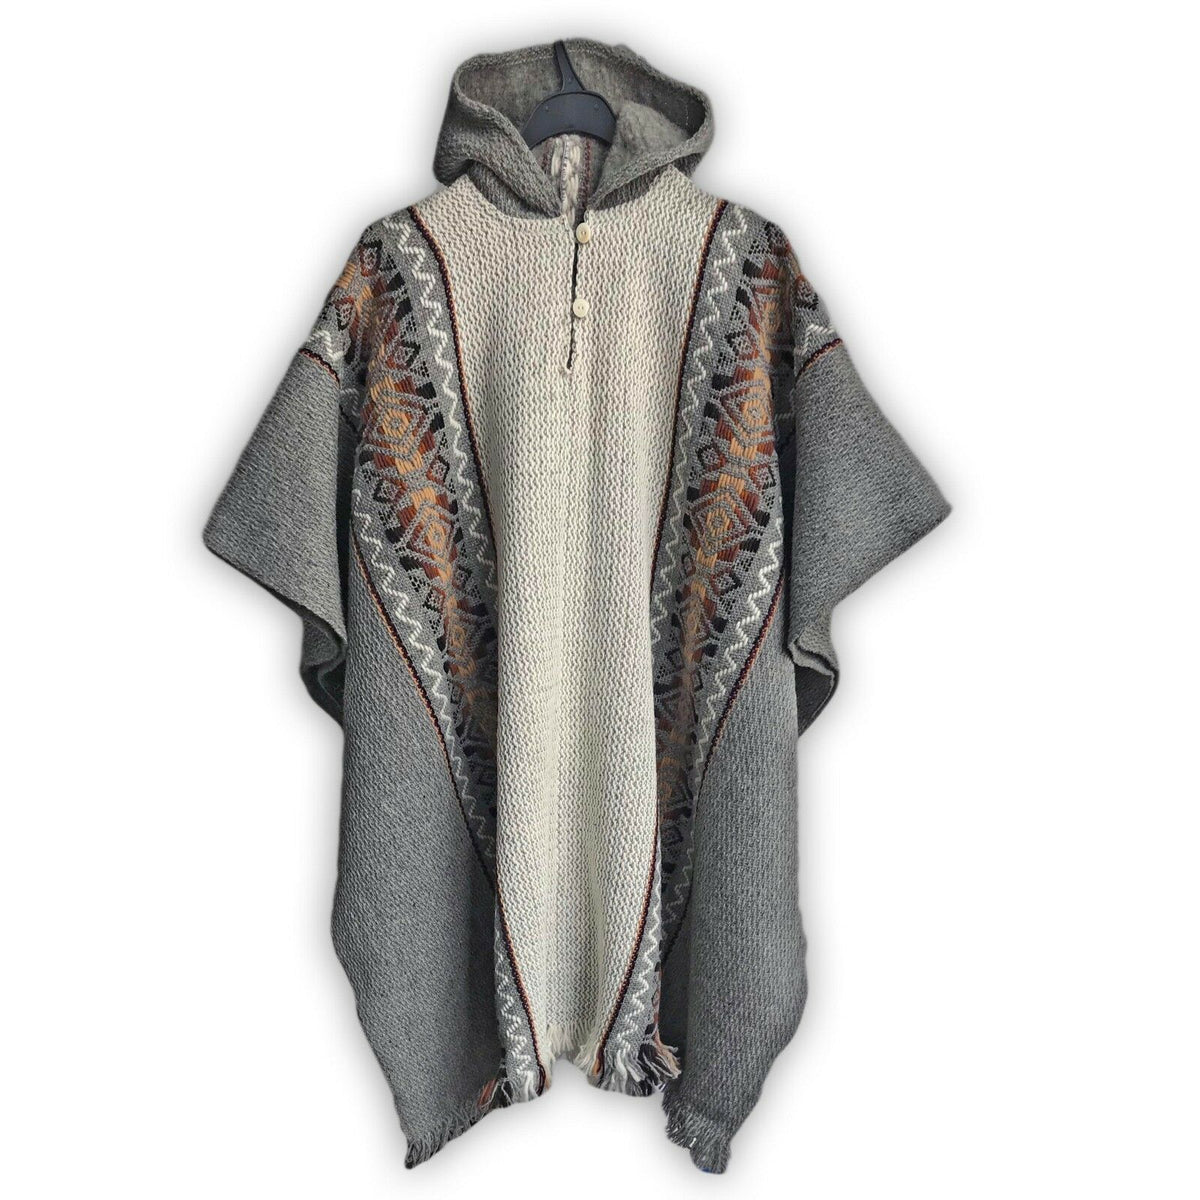 Llama Wool Unisex South American Handwoven Hooded Poncho - solid gray ...